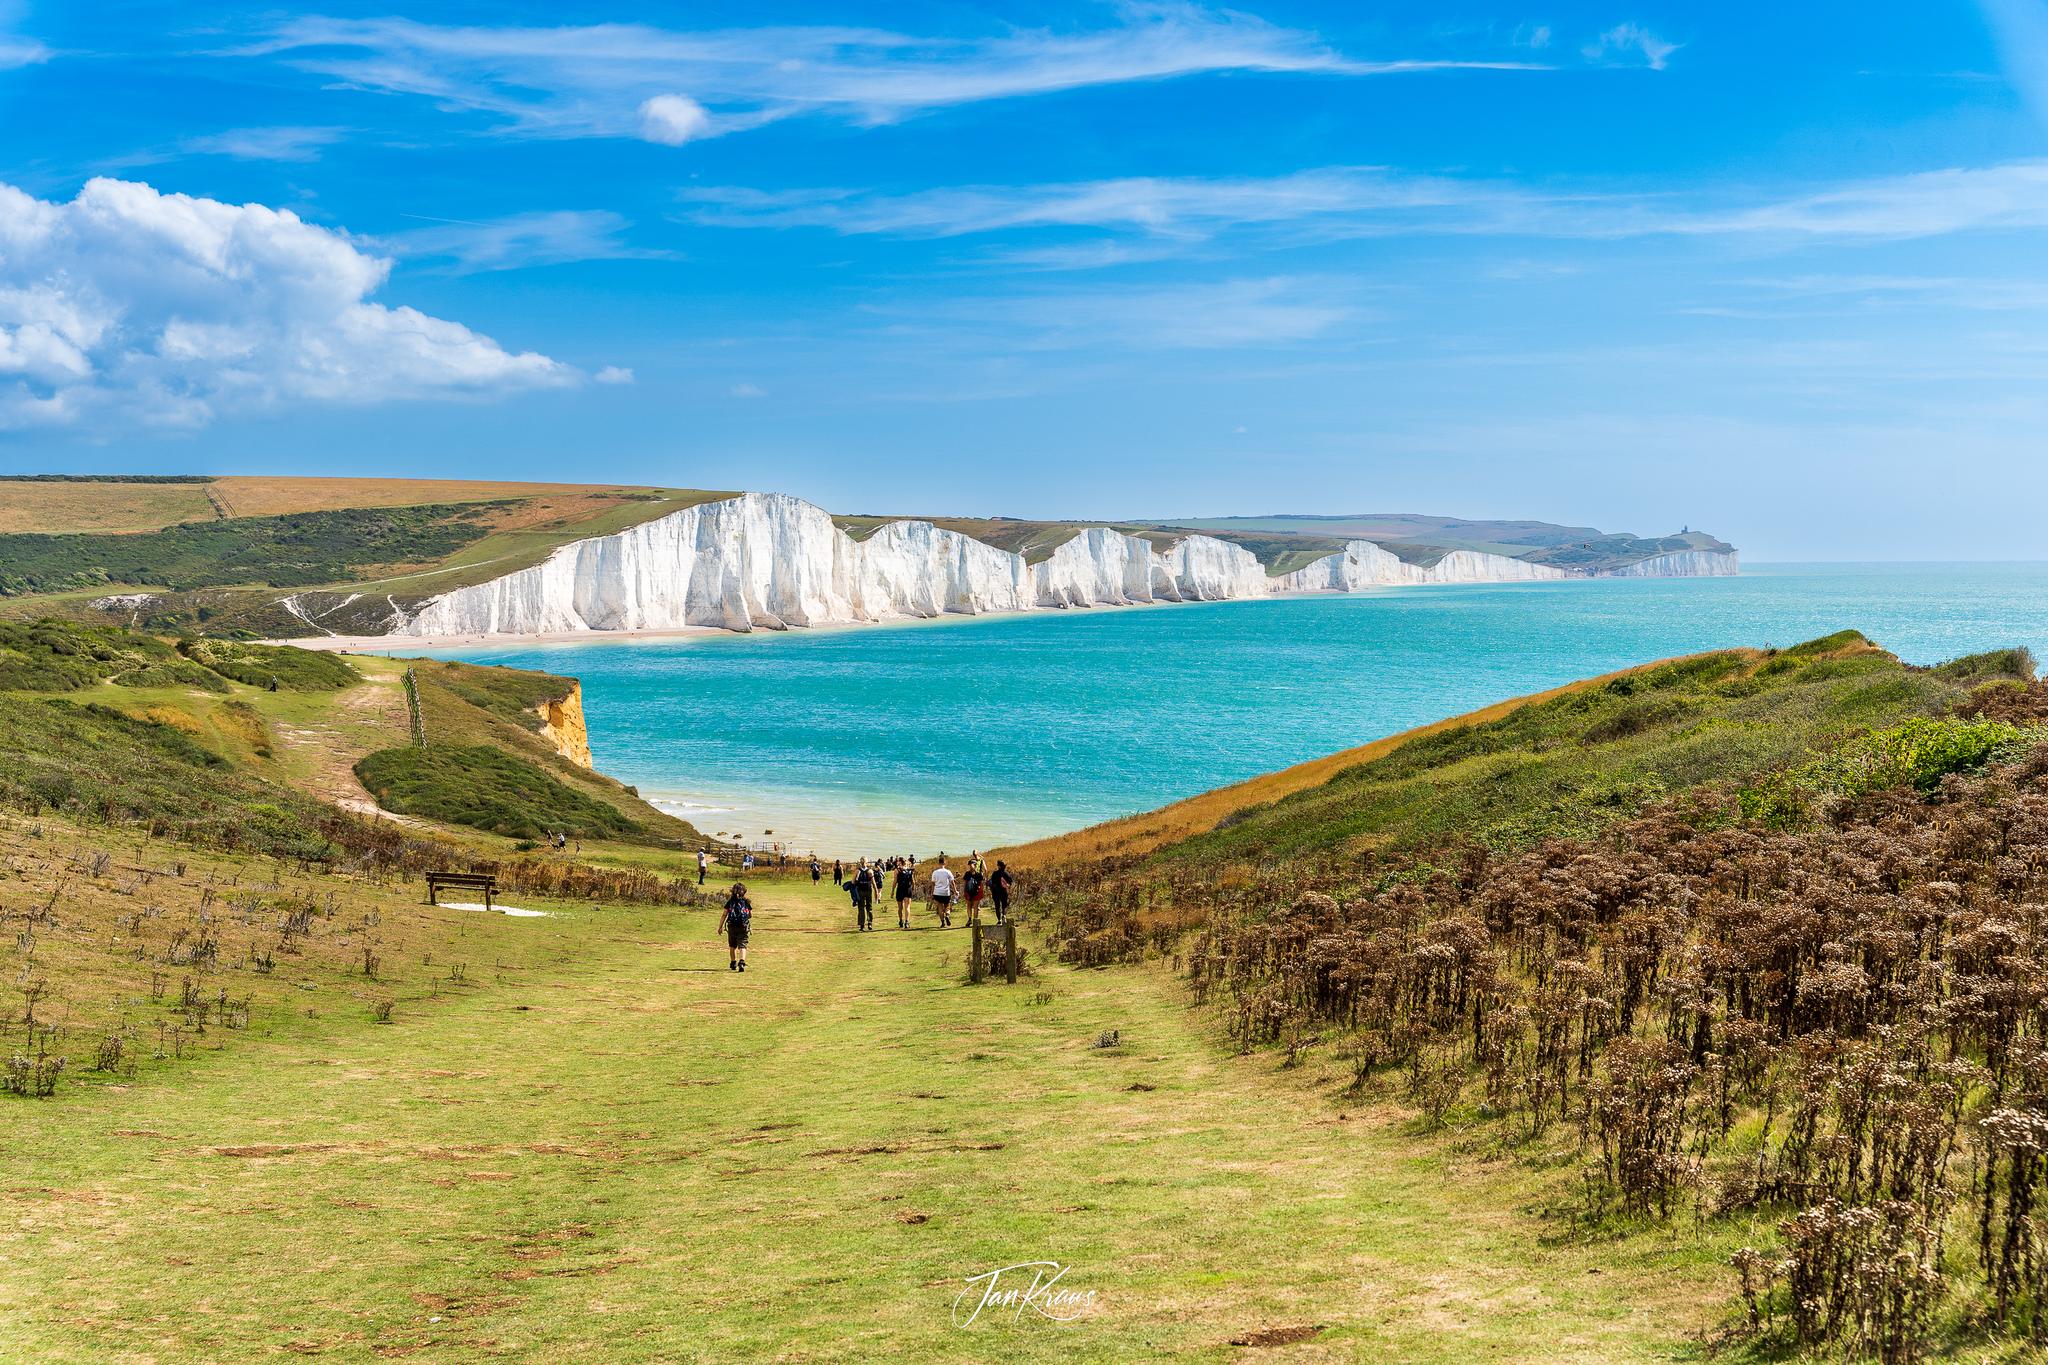 The magnificent views of Seven Sisters cliffs, East Sussex, England, UK